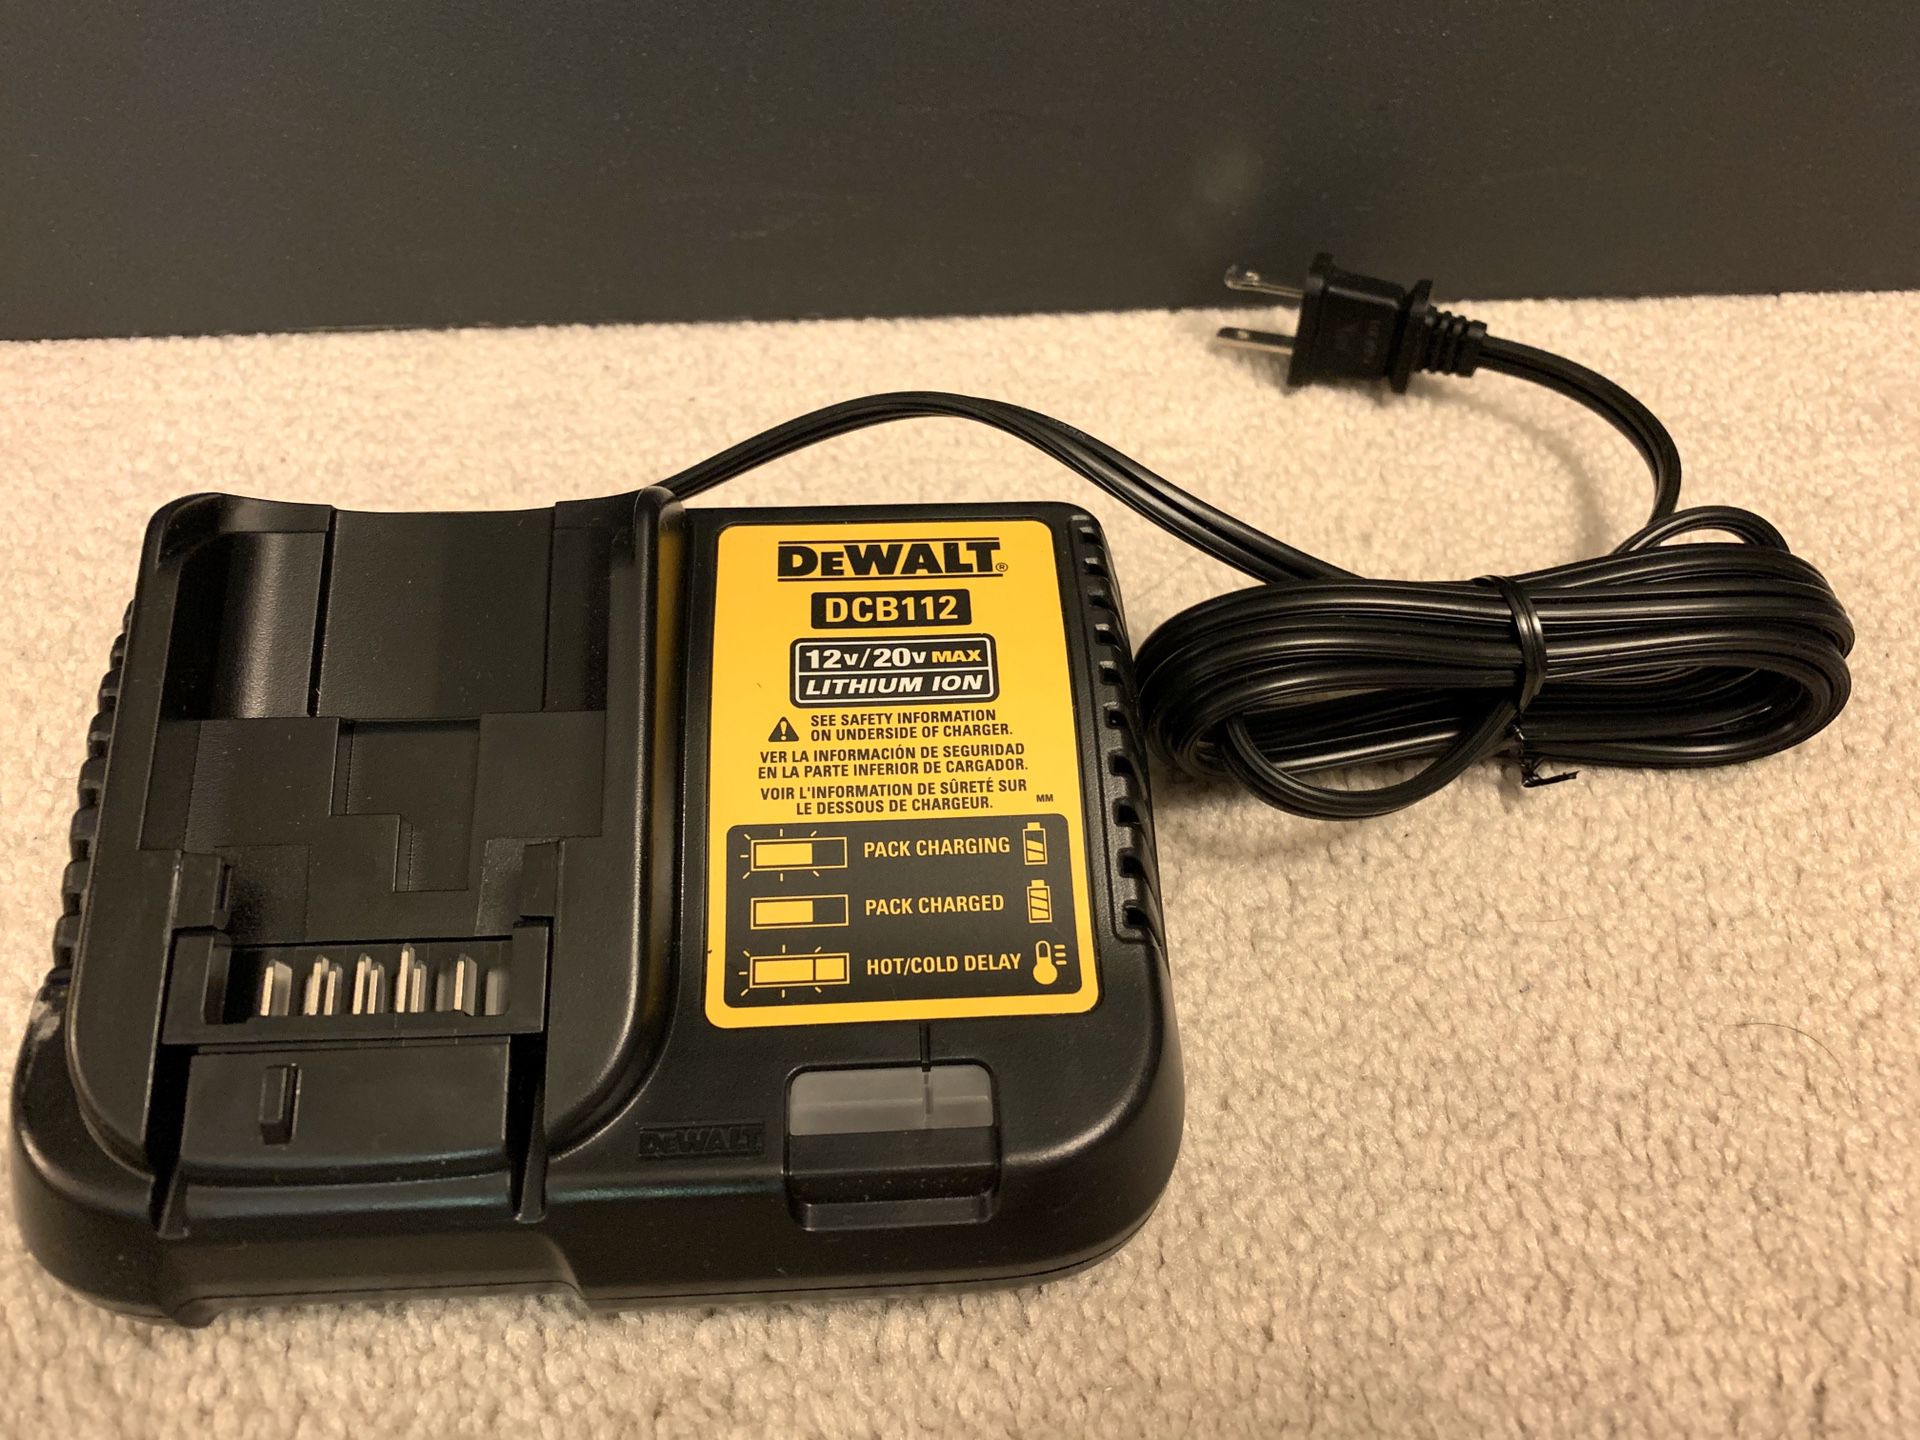 Brand new DeWALT 12-Volt and 20-Volt MAX Lithium-Ion battery charger DCB112